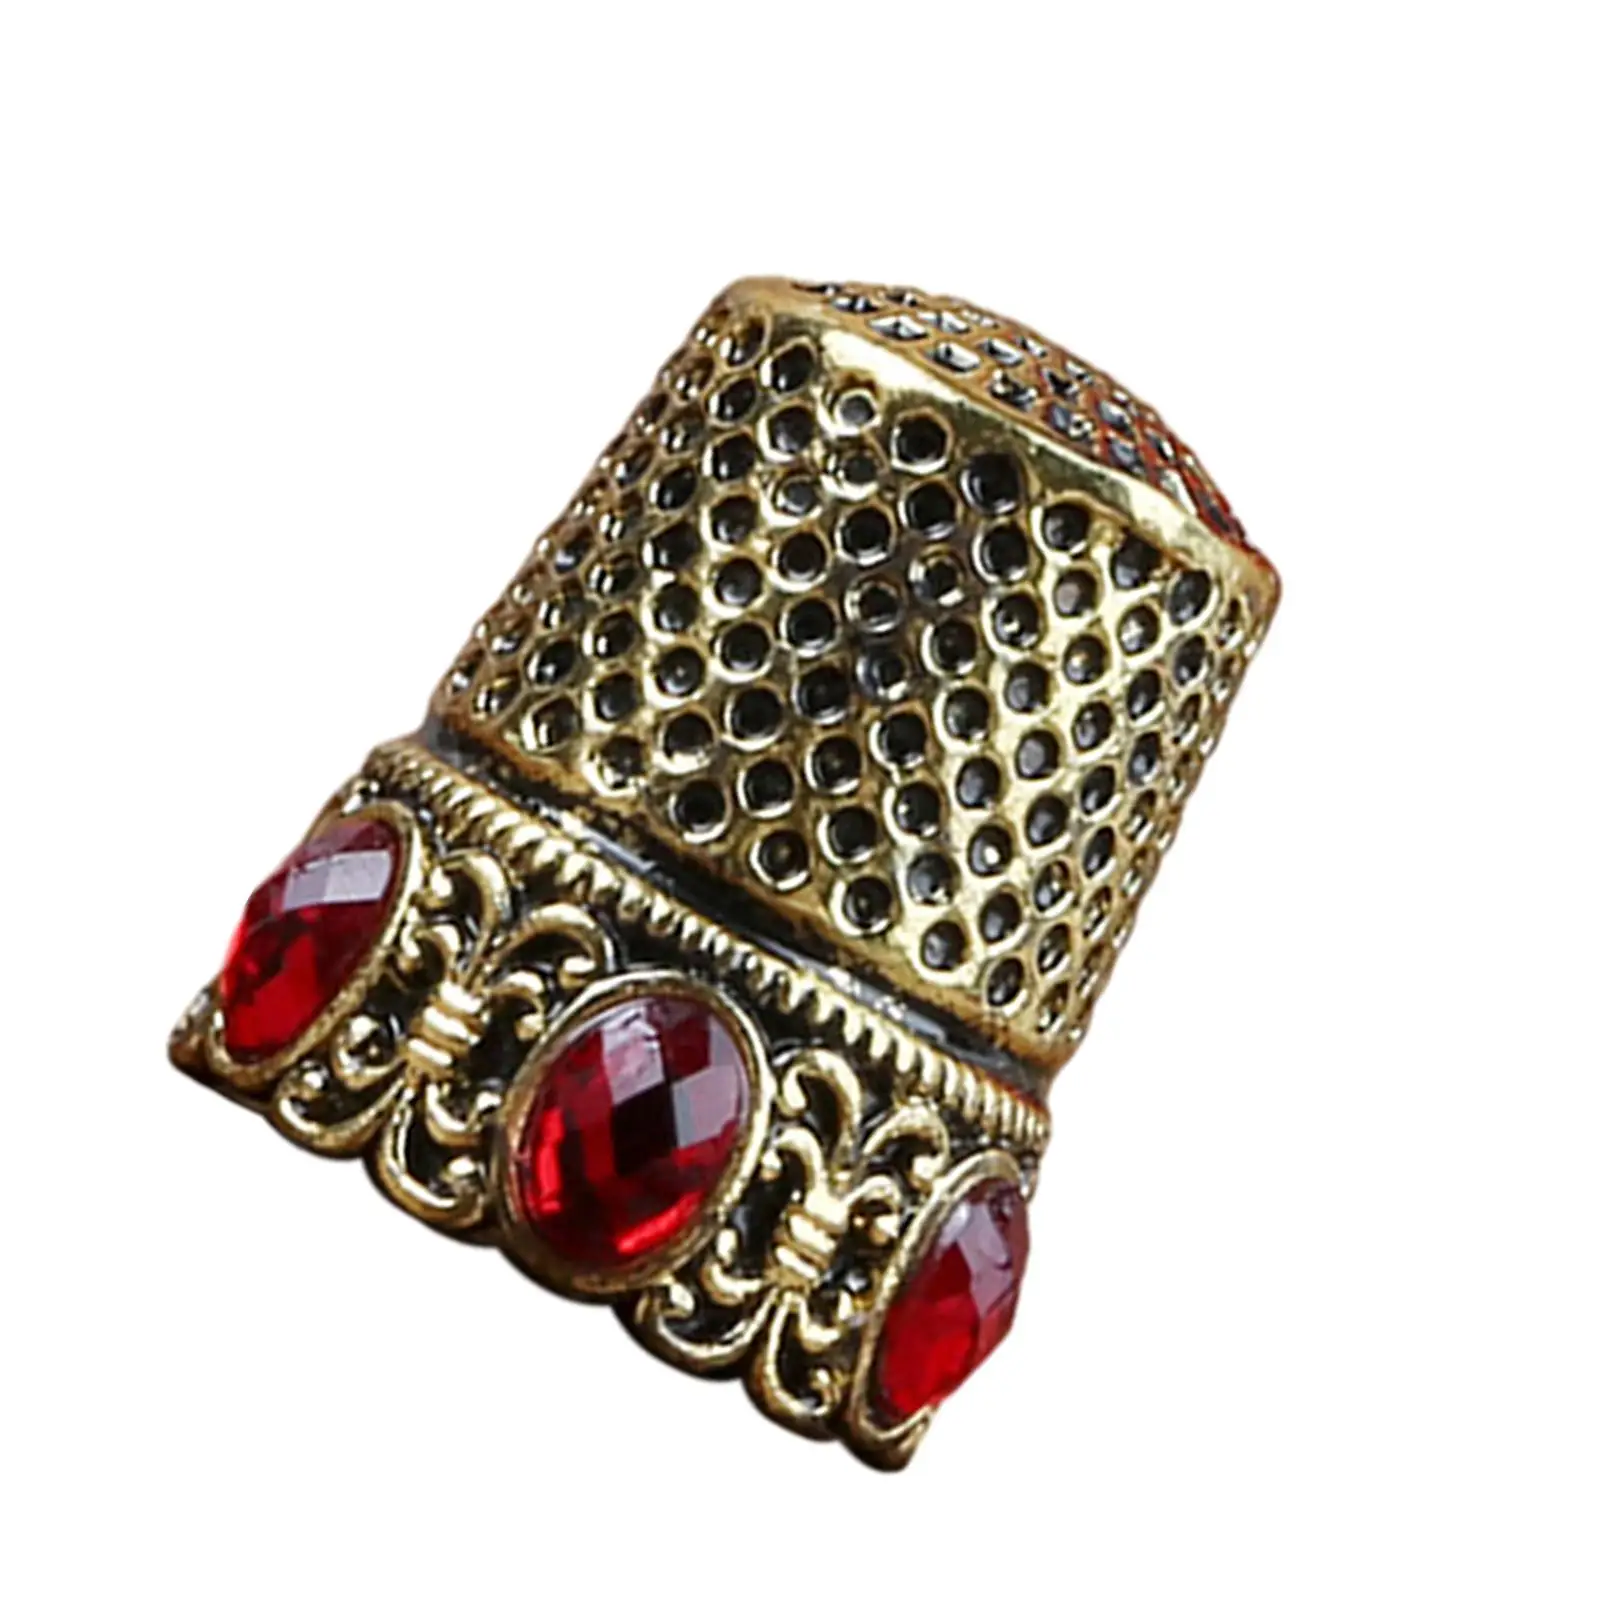 Sewing Thimble Finger Protector Antique Metal Thimble Finger Guards for Sewing Embroidery Needlework Craft Quilting Accessories